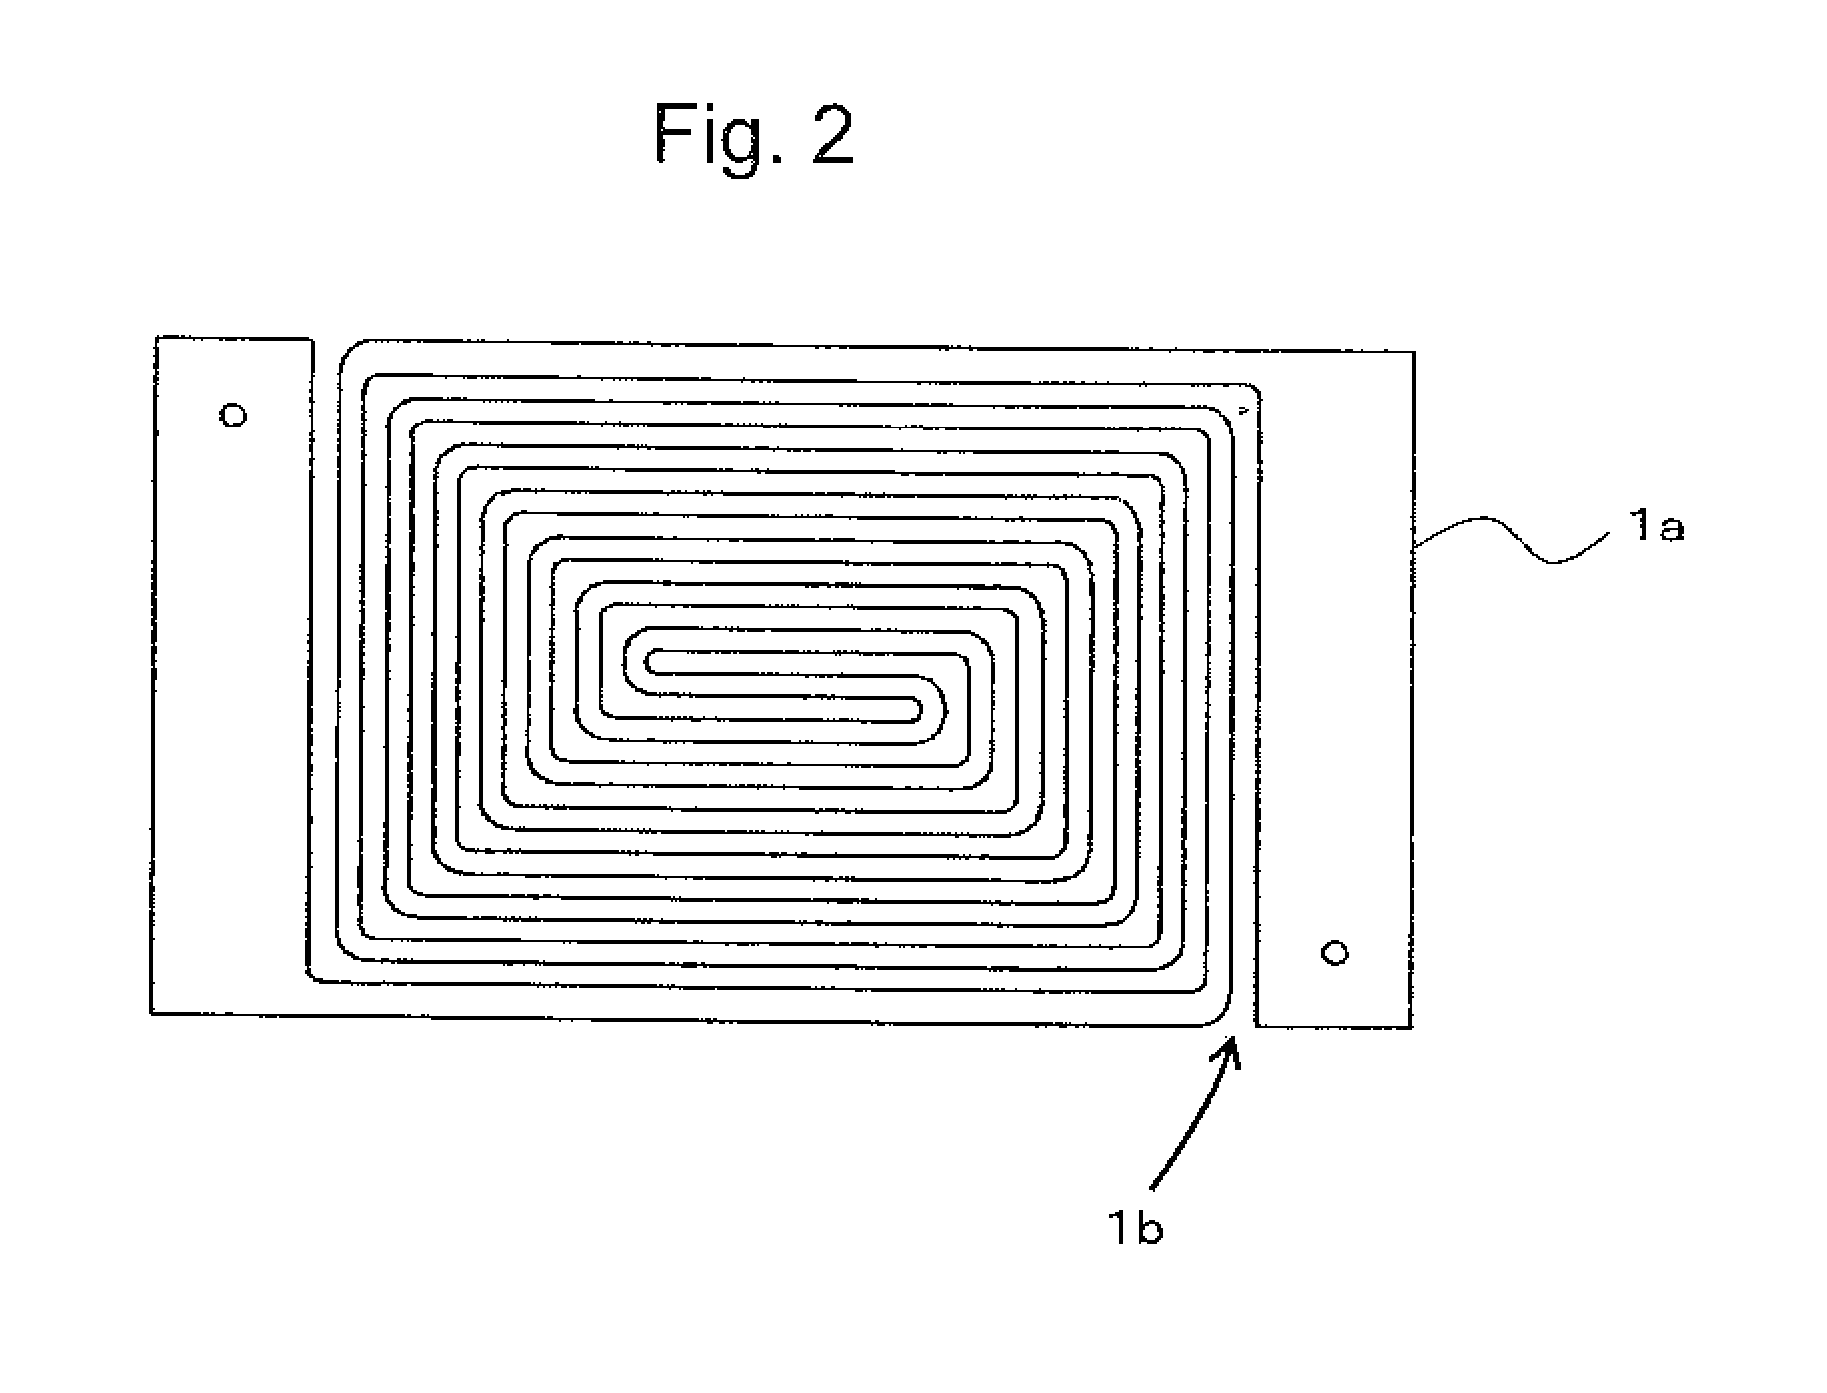 Heating apparatus for x-ray inspection